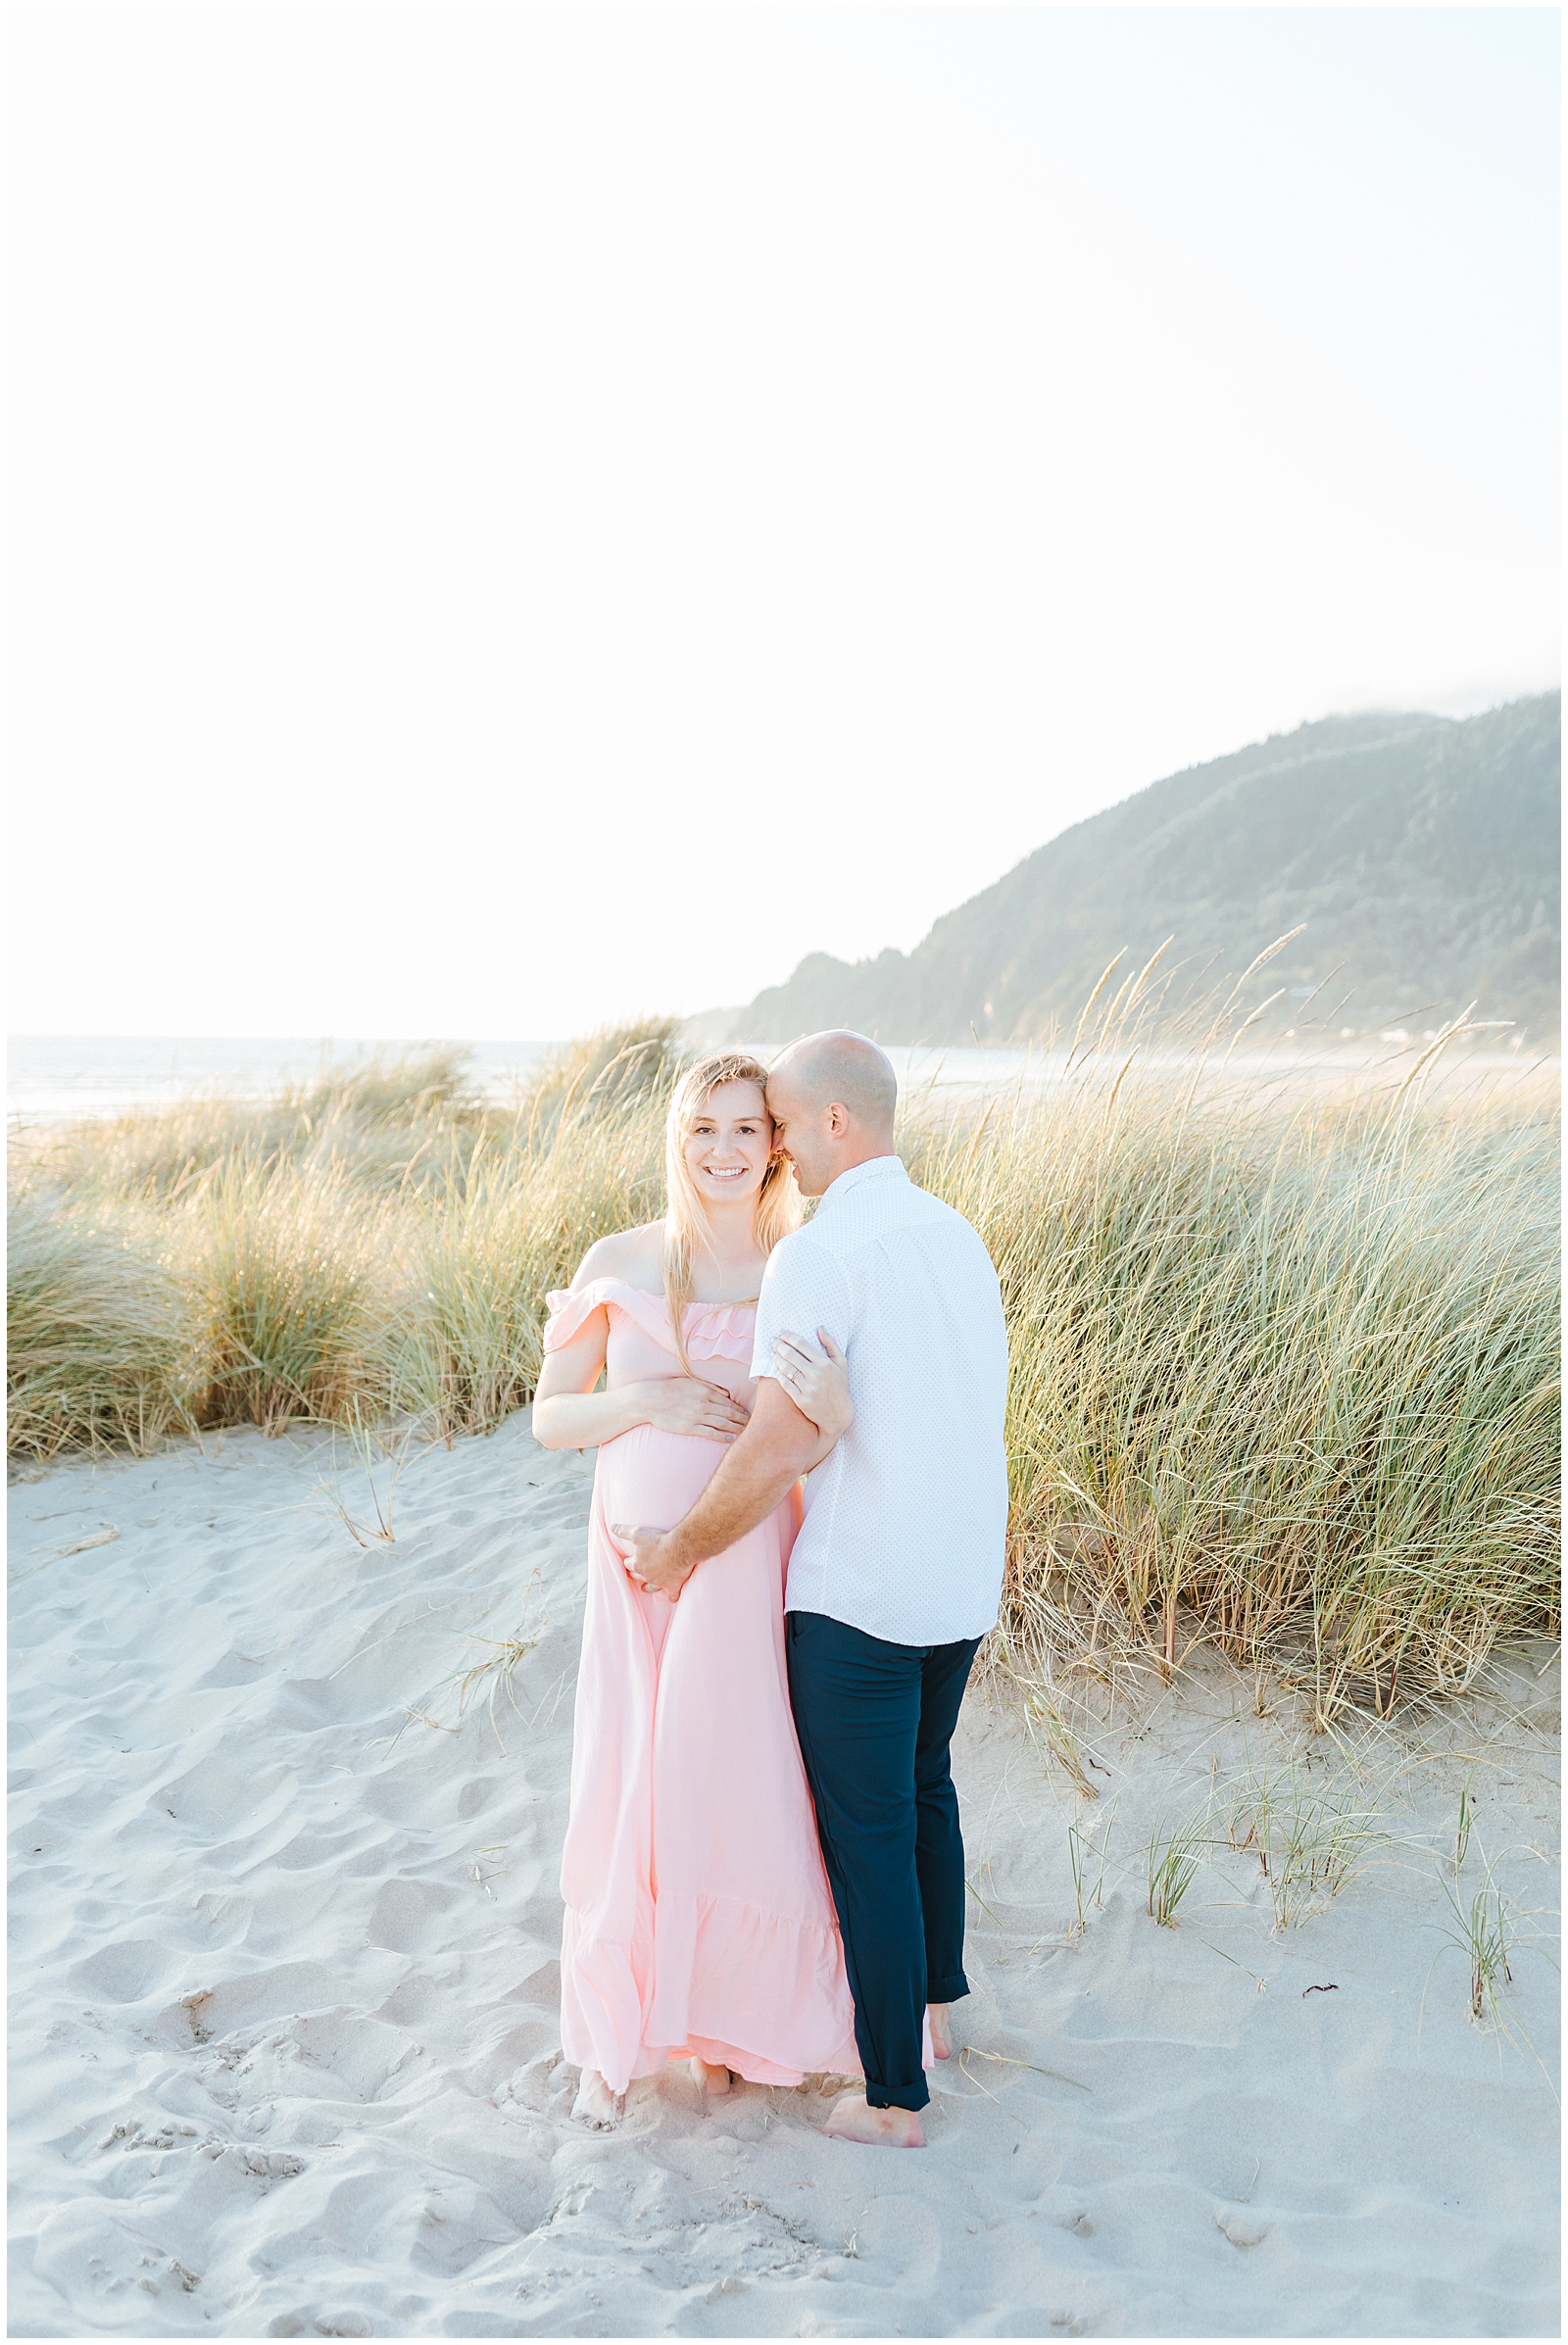 Oregon Coast Beach Maternity Session at Golden Hour in Blush Dress